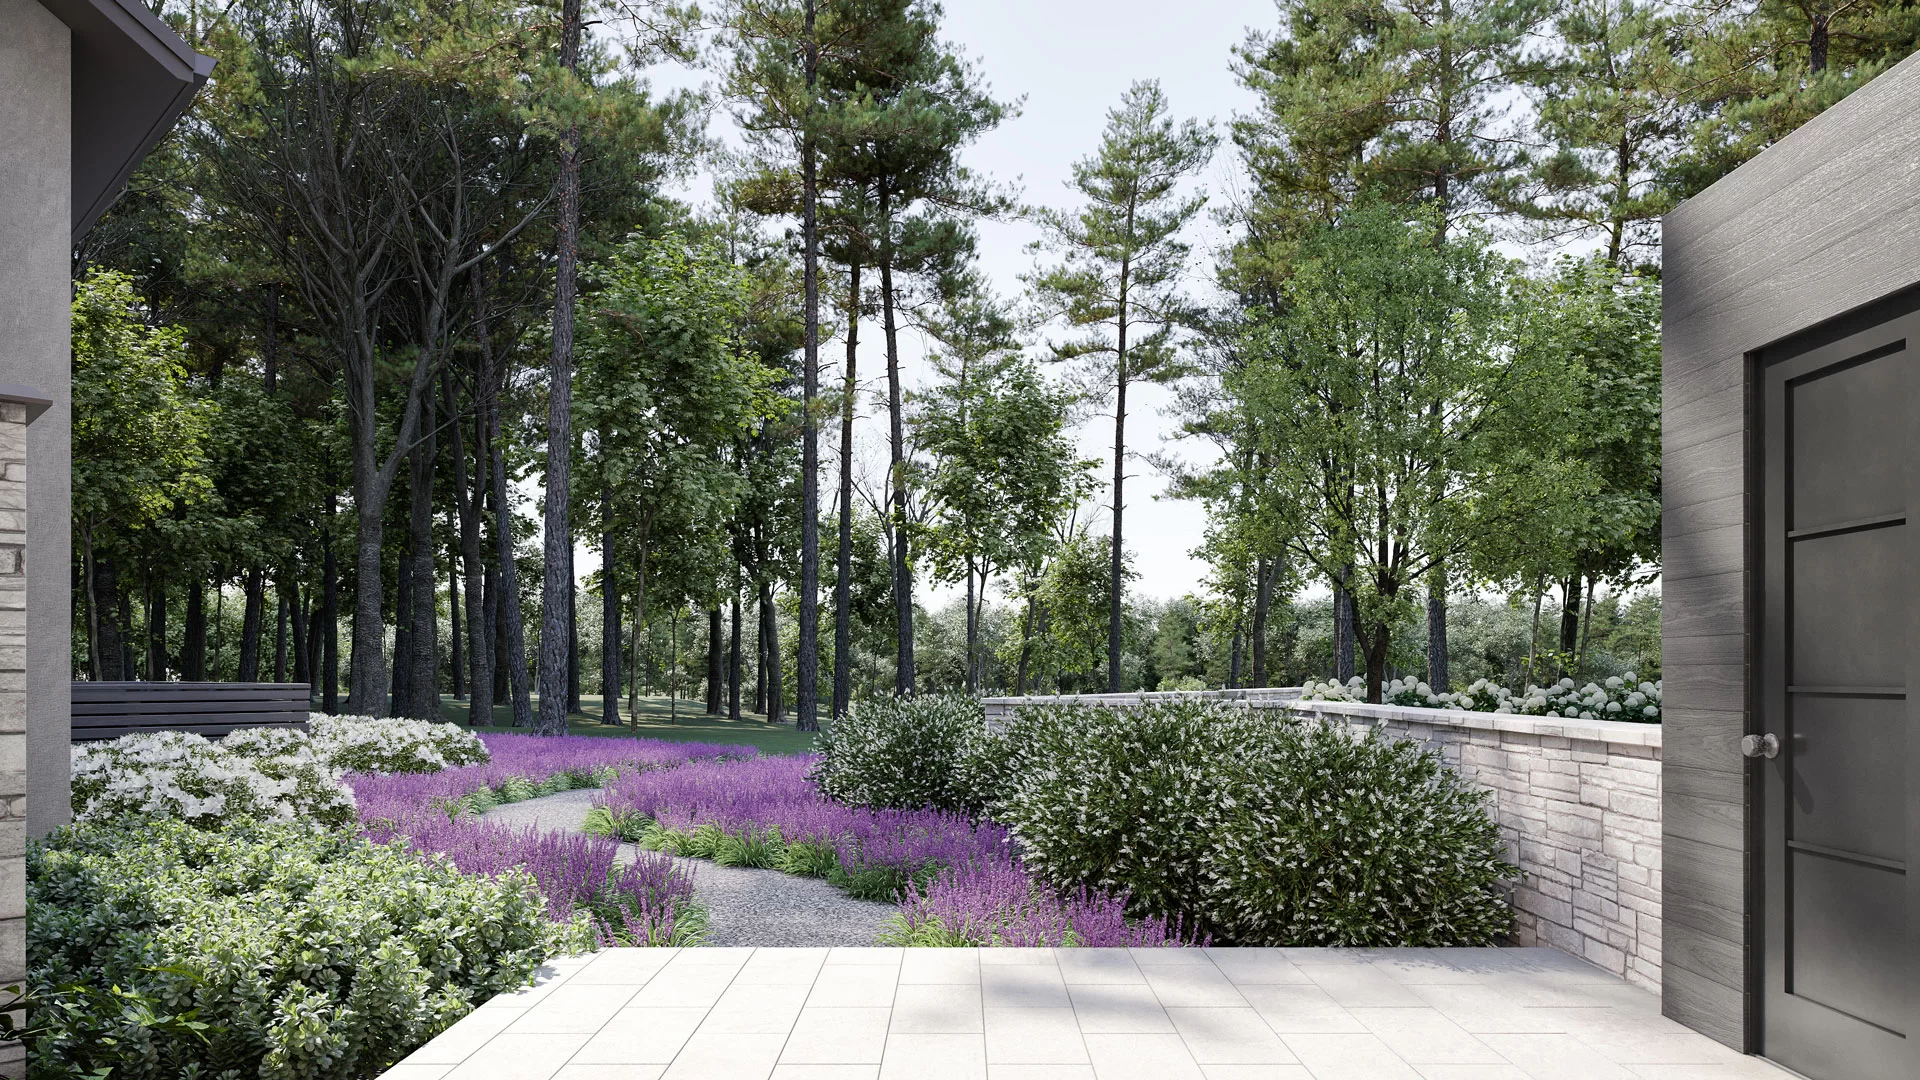 CGI Rendering for a Landscape Design in the House Project